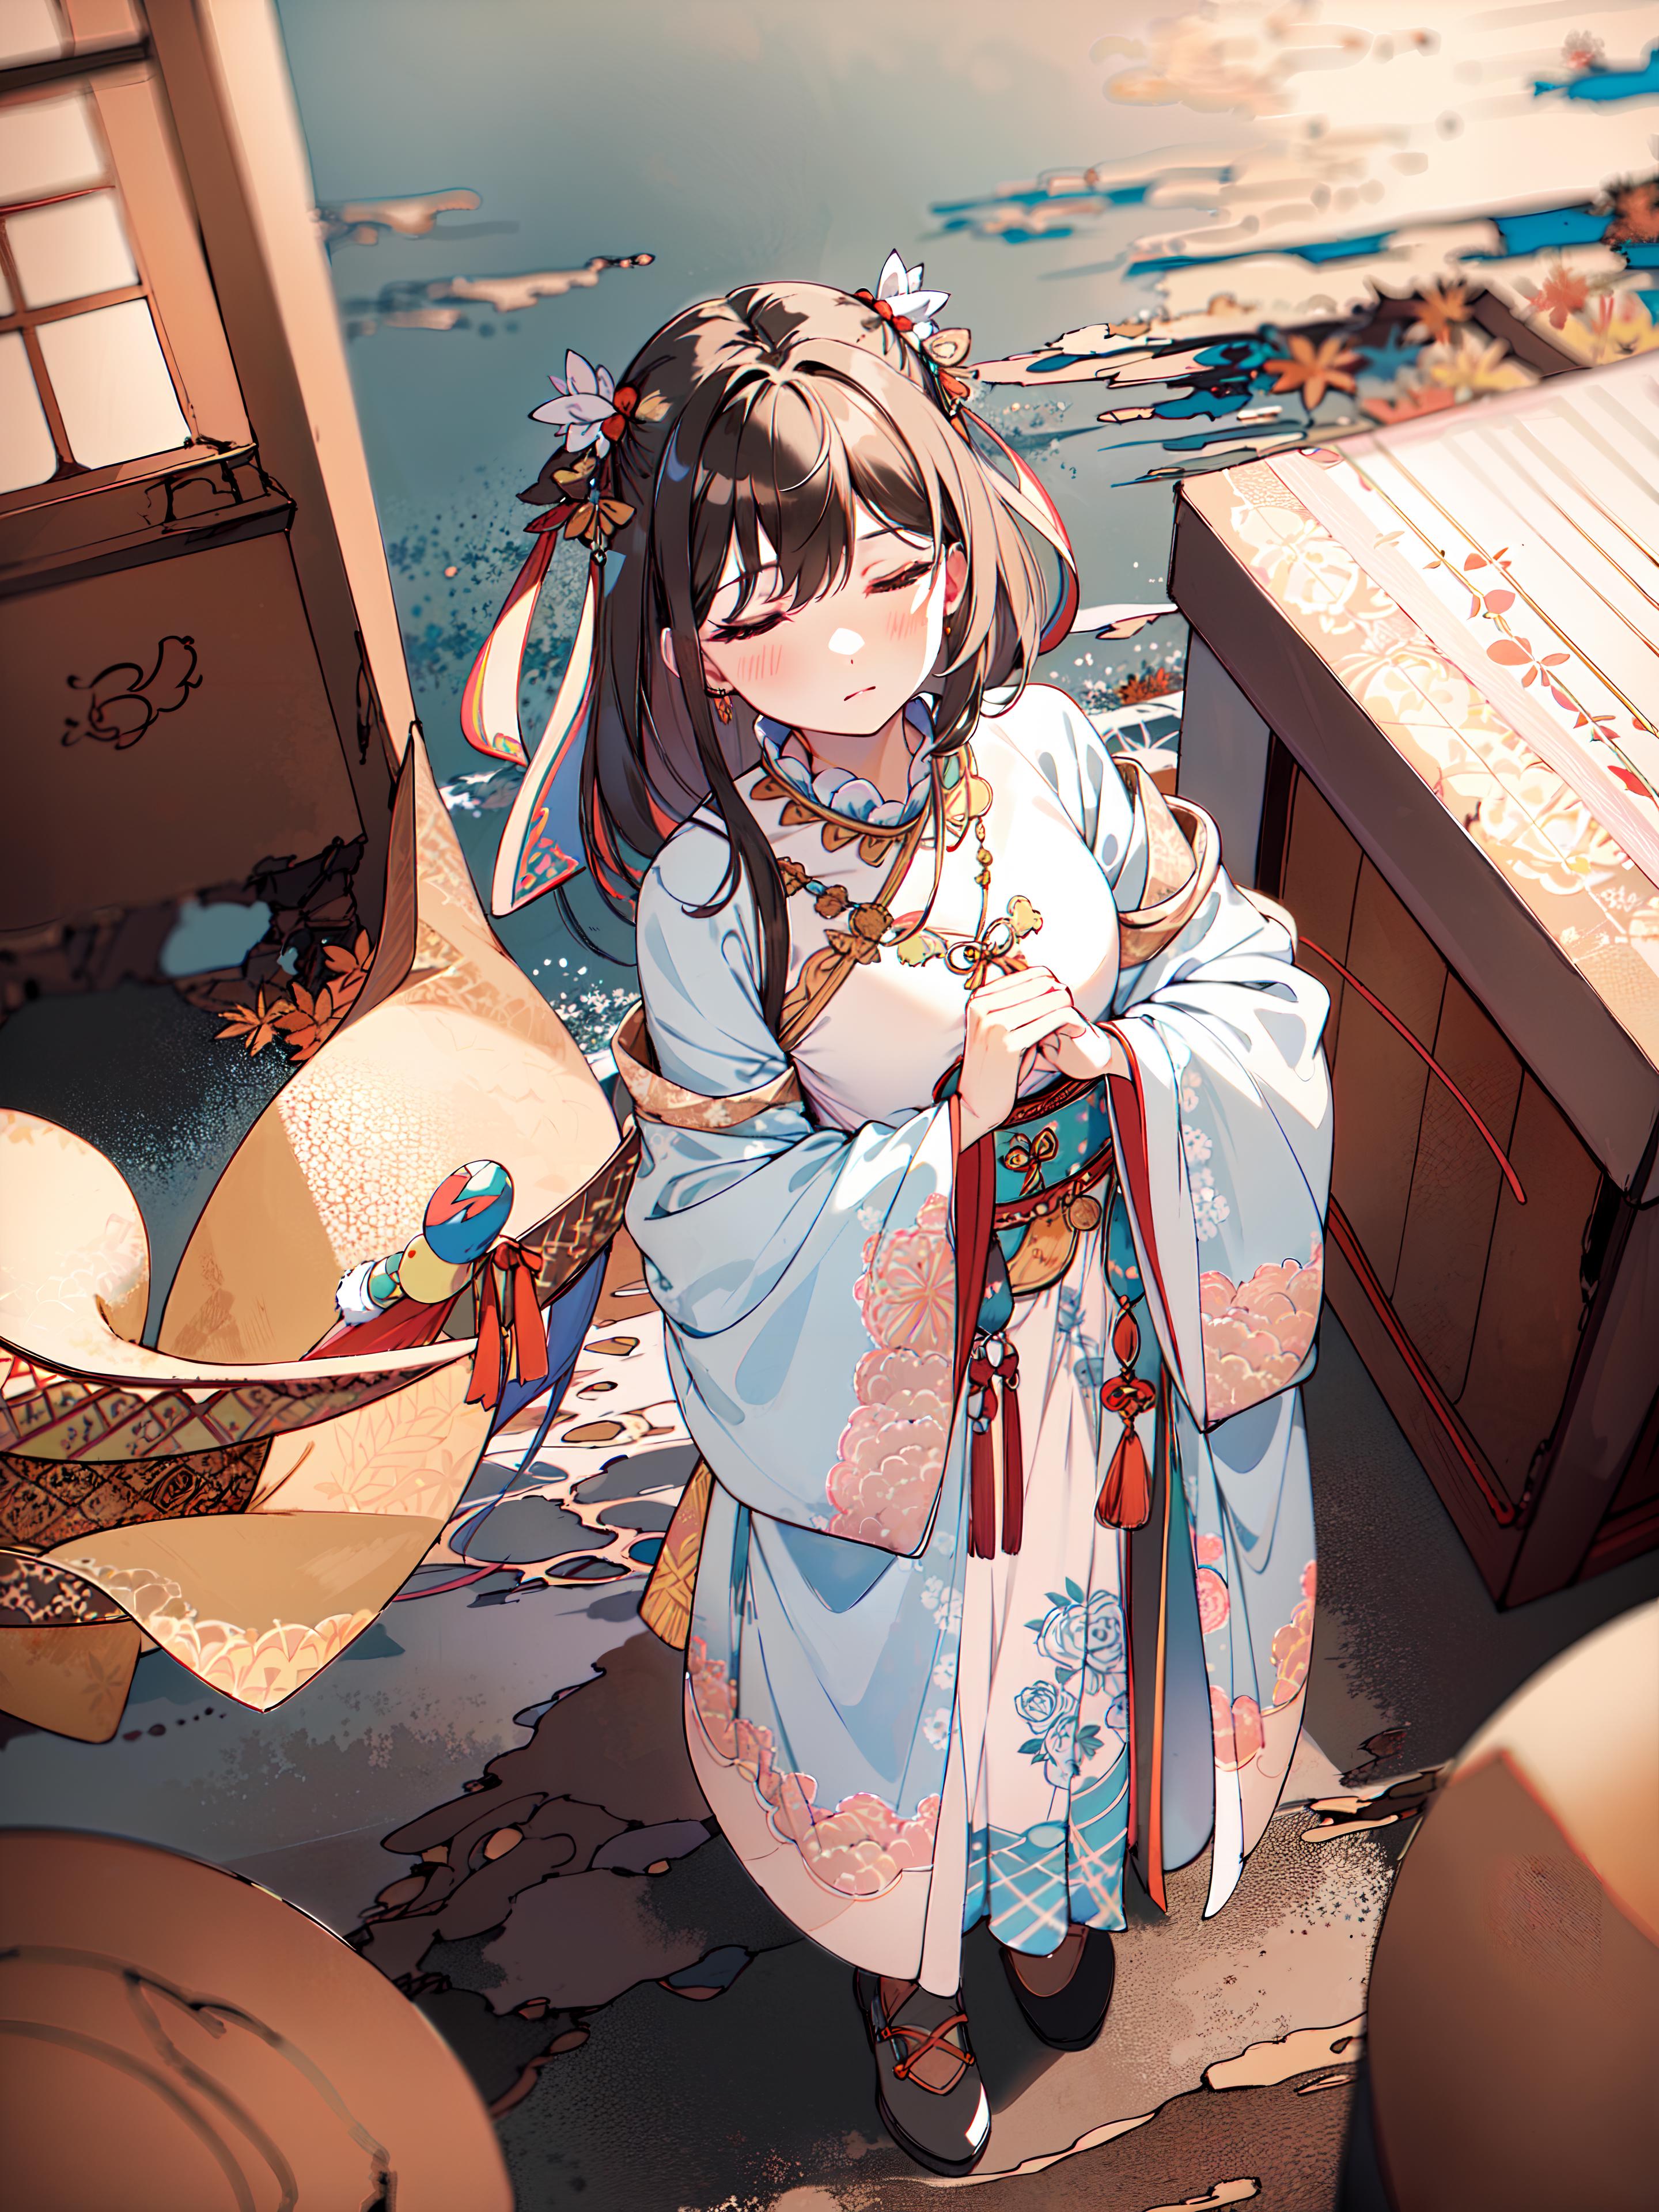 Anime Cartoon Woman in Traditional Asian Dress with Long Hair and Bird Feathers